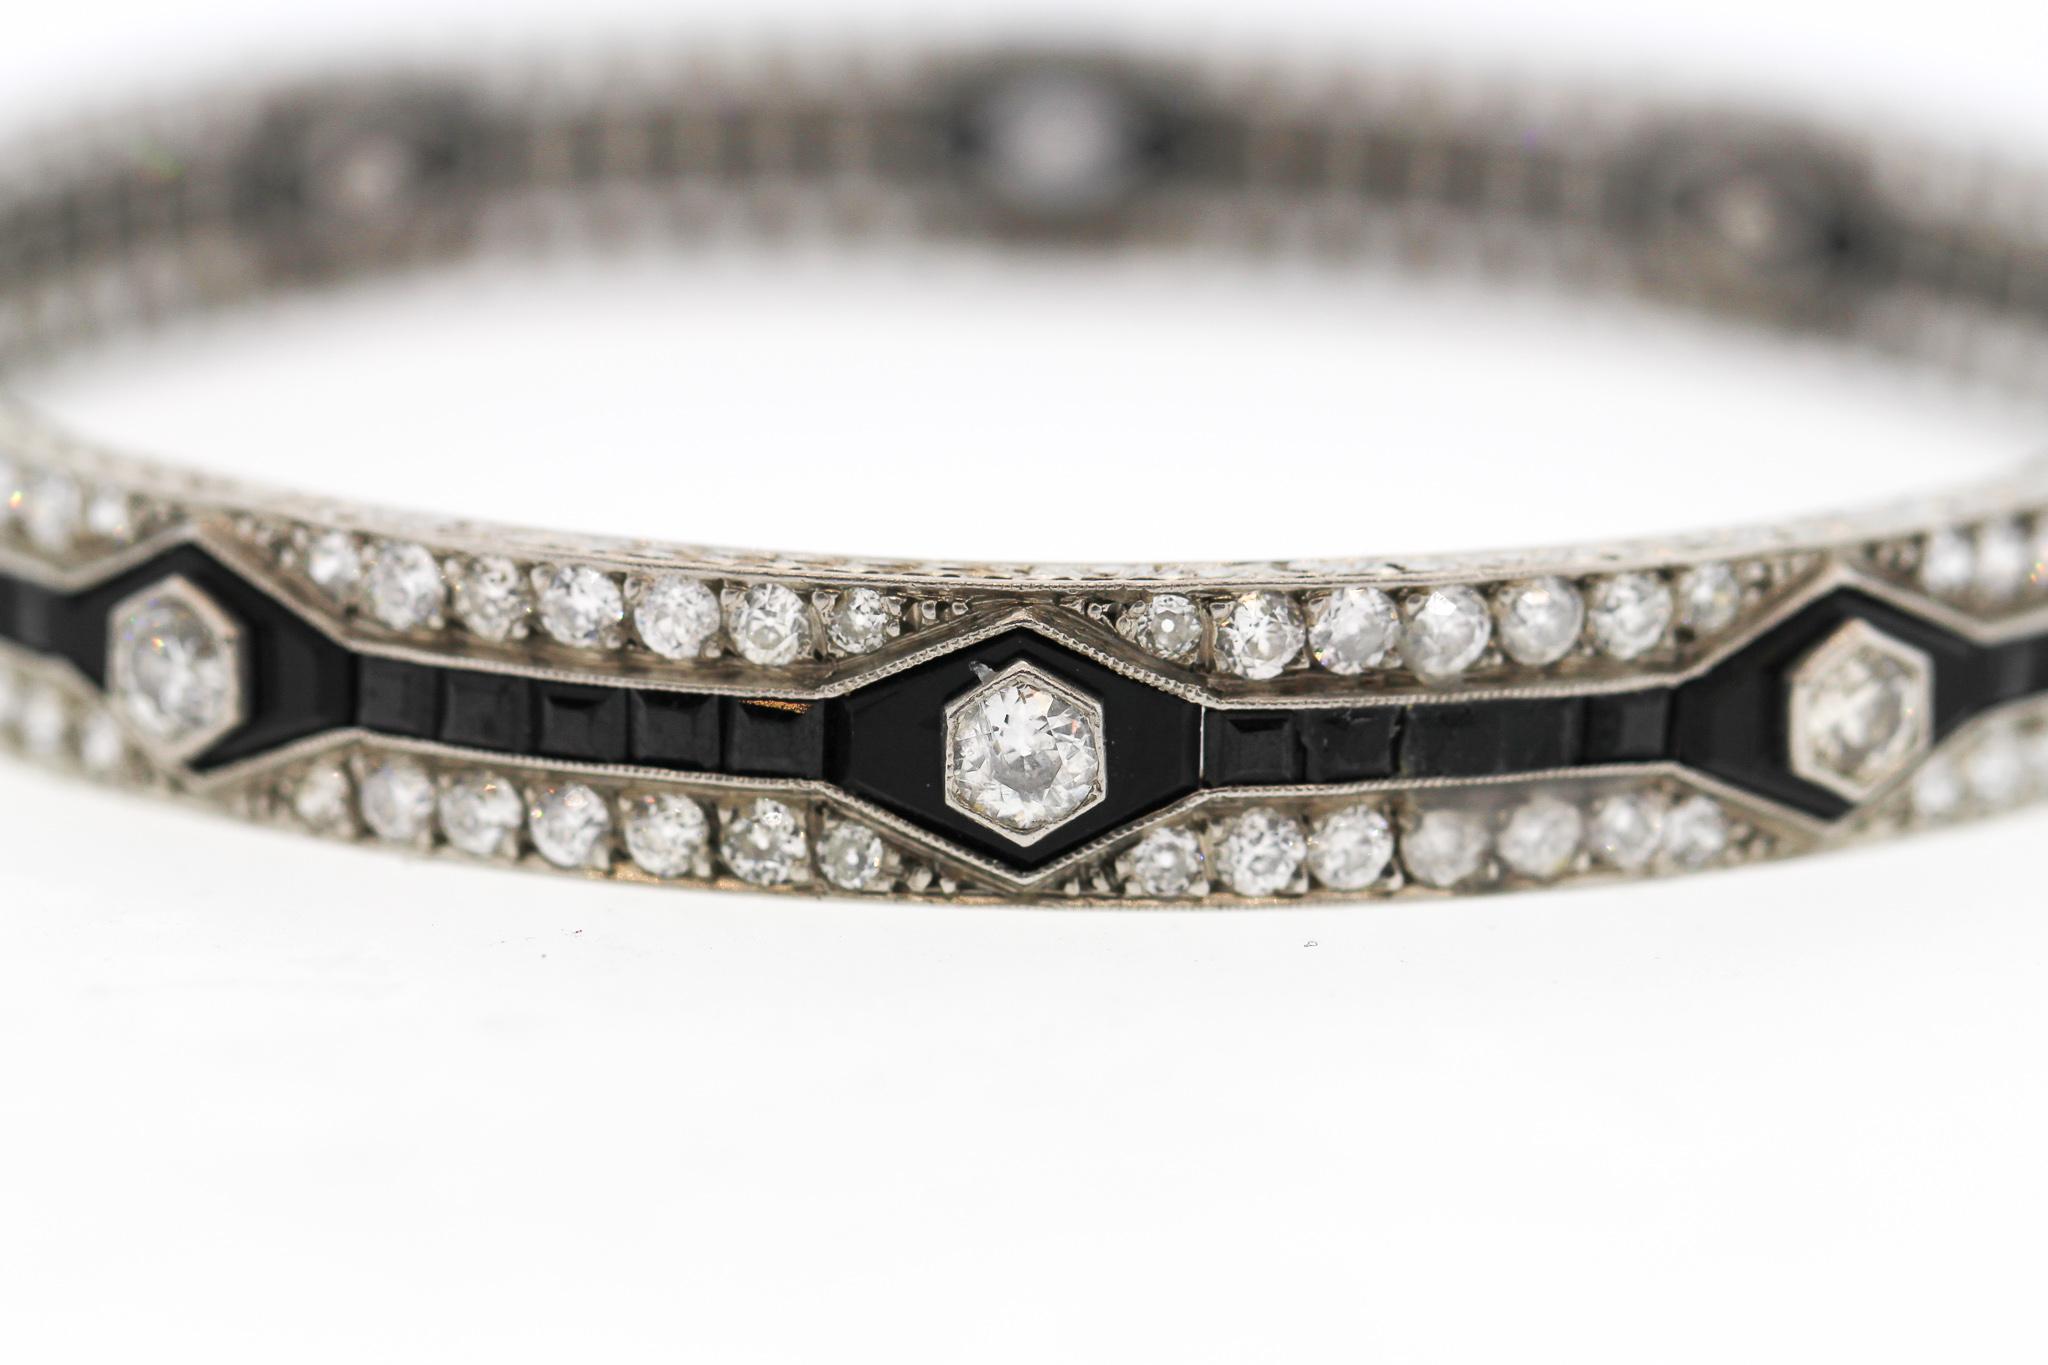 A spectacular Art Deco platinum onyx and diamond bangle bracelet, circa 1920. This bracelet has a strong geometric pattern created by the calibre cut onyx. It is set with Old European Cut diamonds, 150 stones weighing approximately 12.50 carats. The